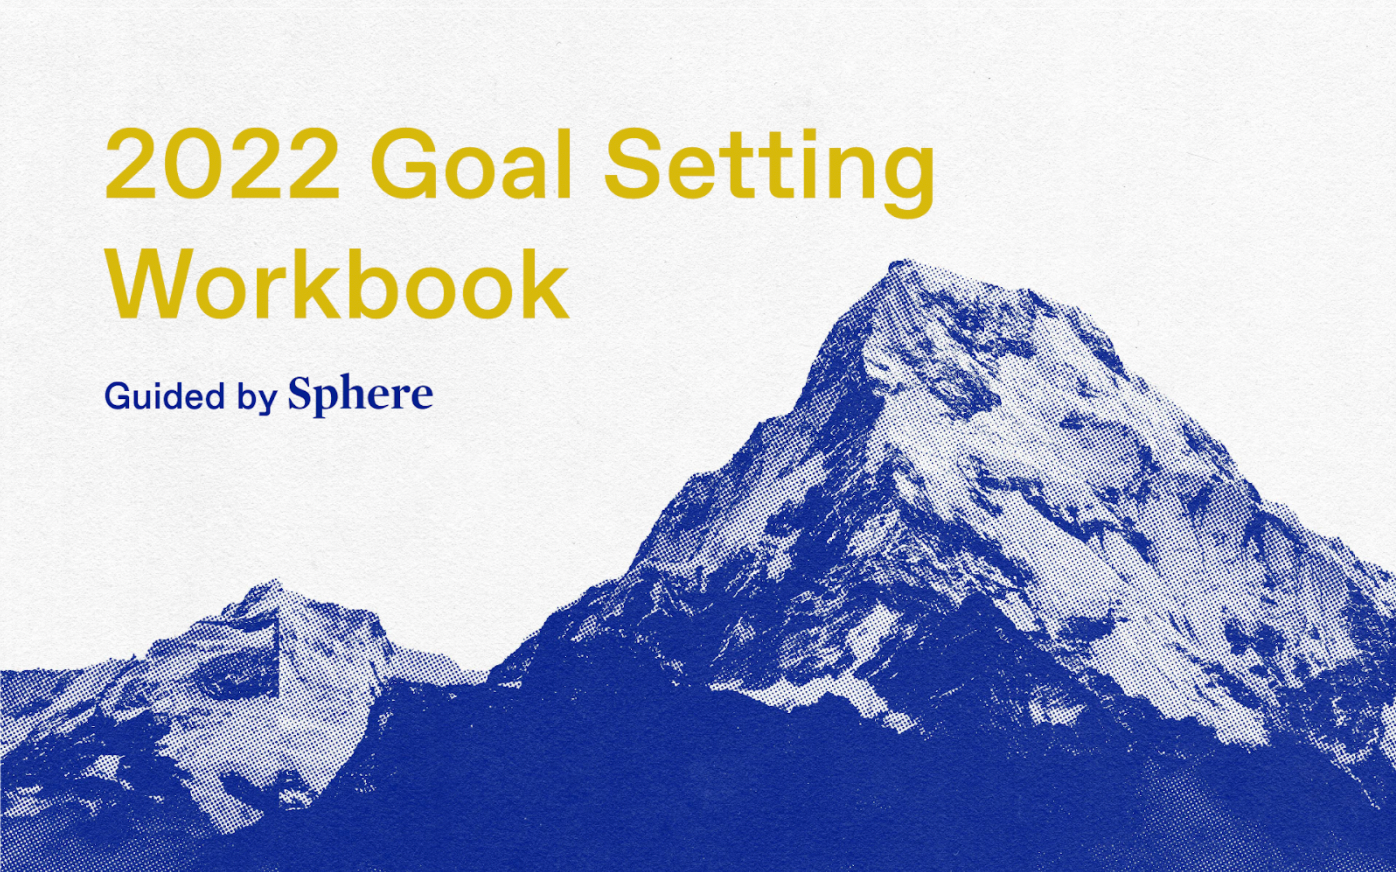 Mindful Goal Setting with Sphere